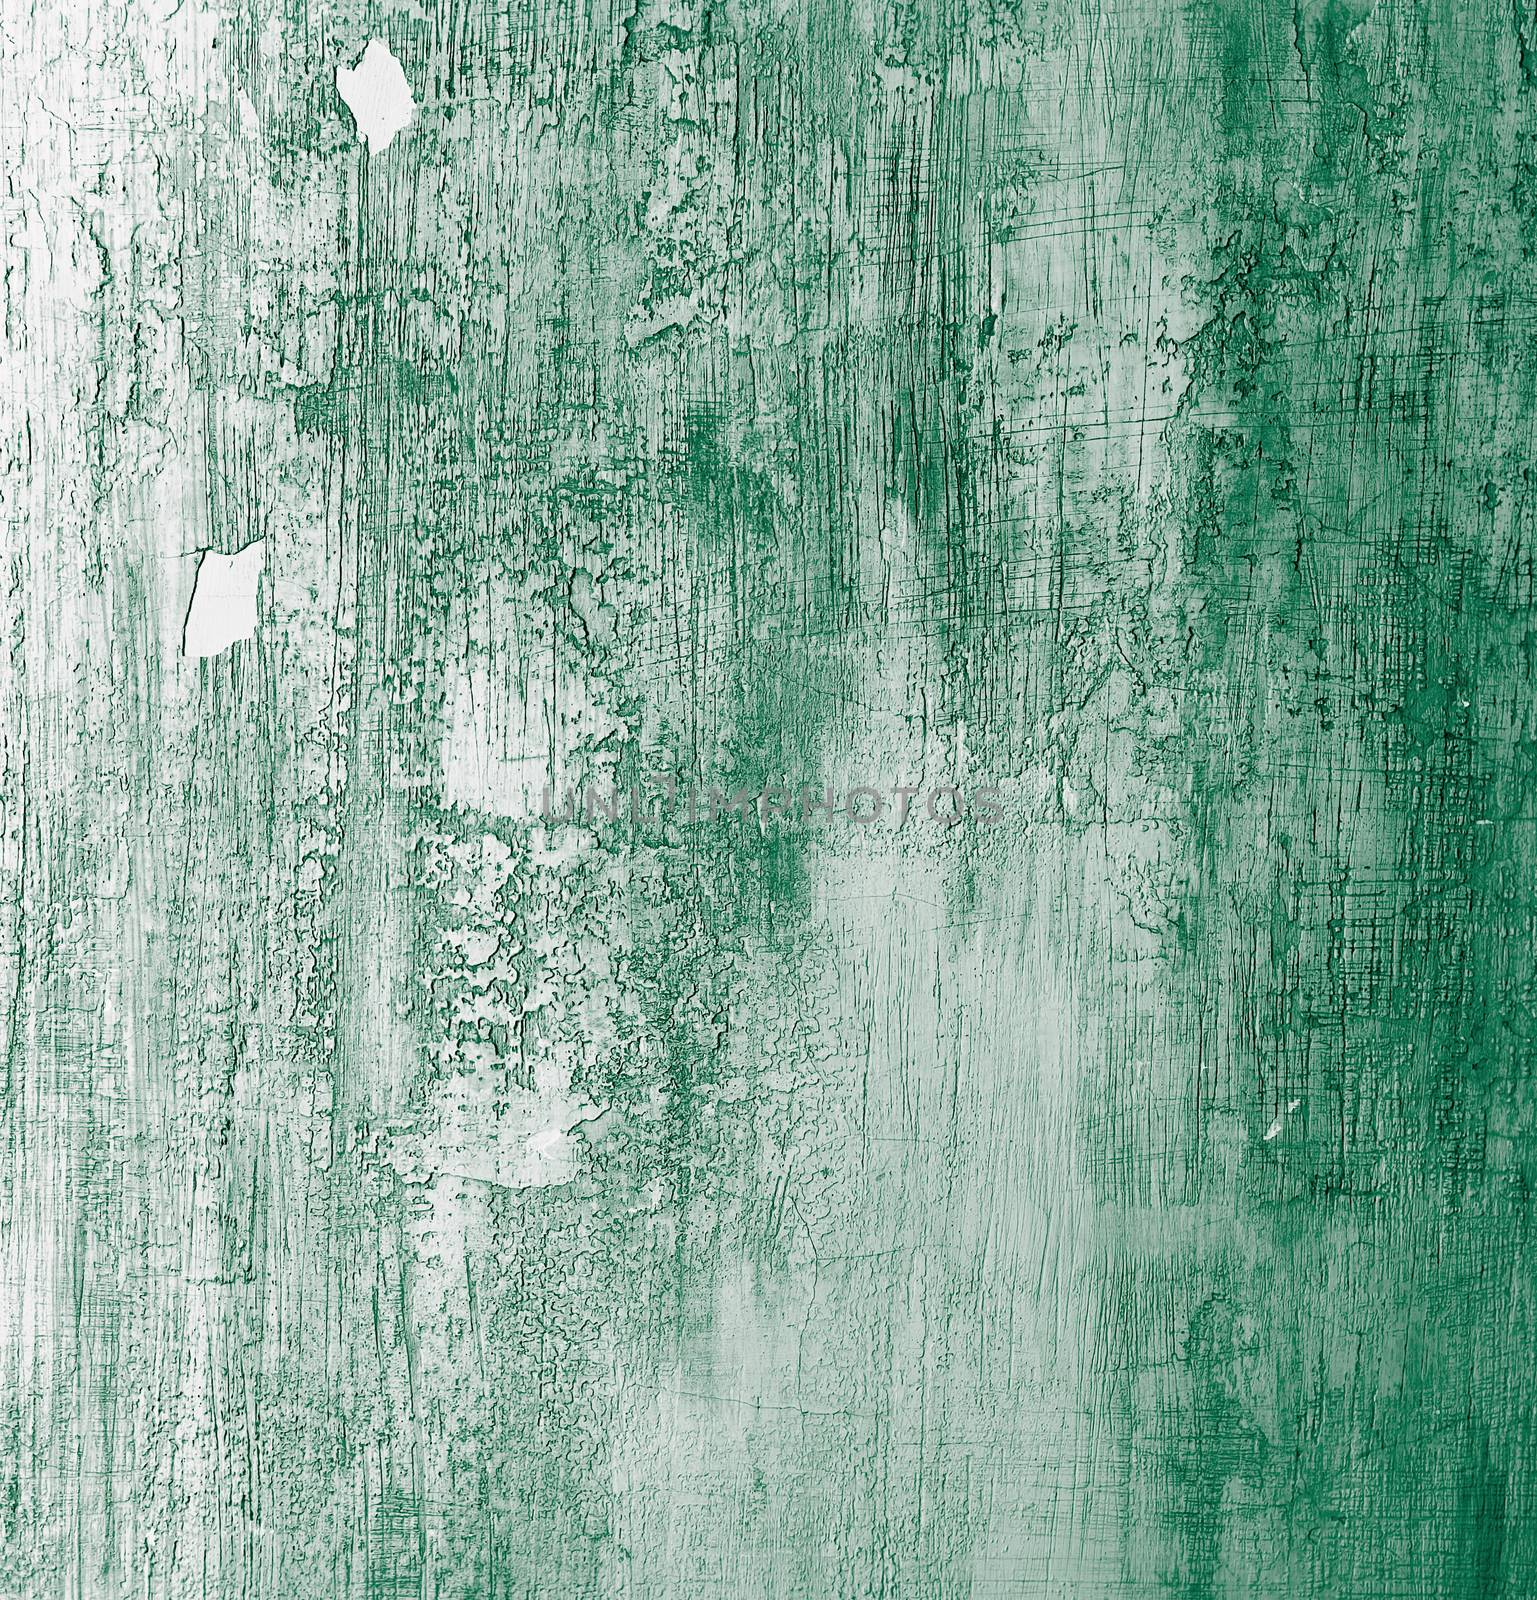 Green and White Cracked Cement Wall Background closeup